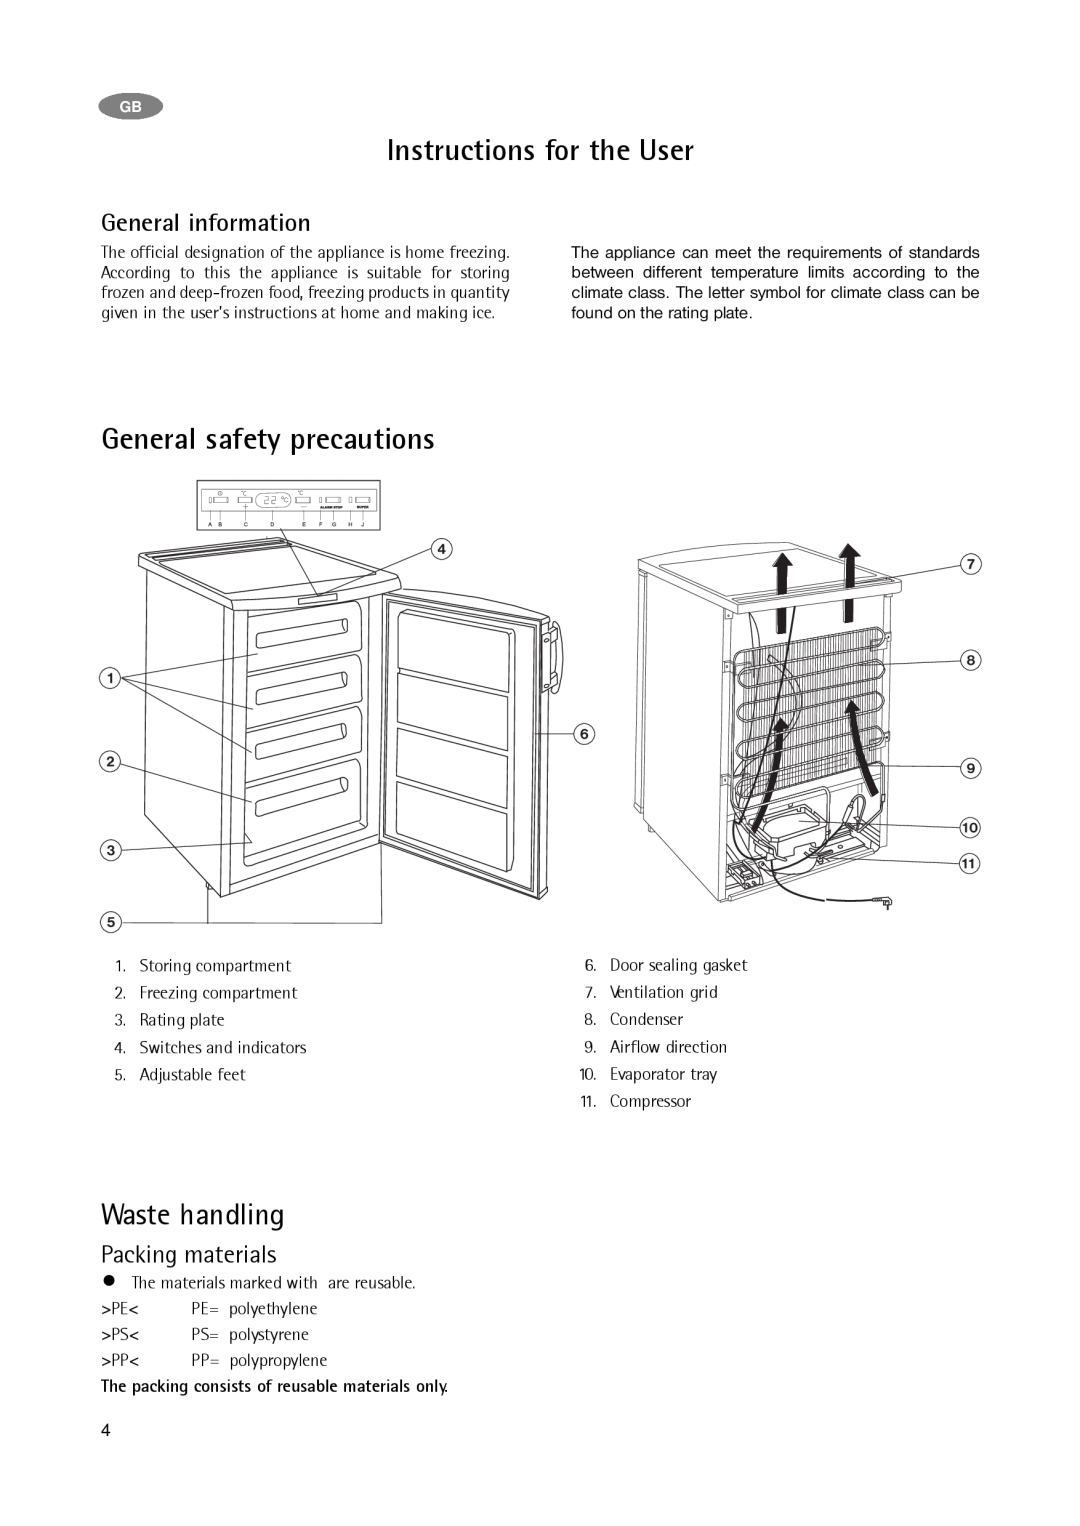 AEG A 75100 GA3 manual Instructions for the User, General safety precautions, Waste handling, General information 